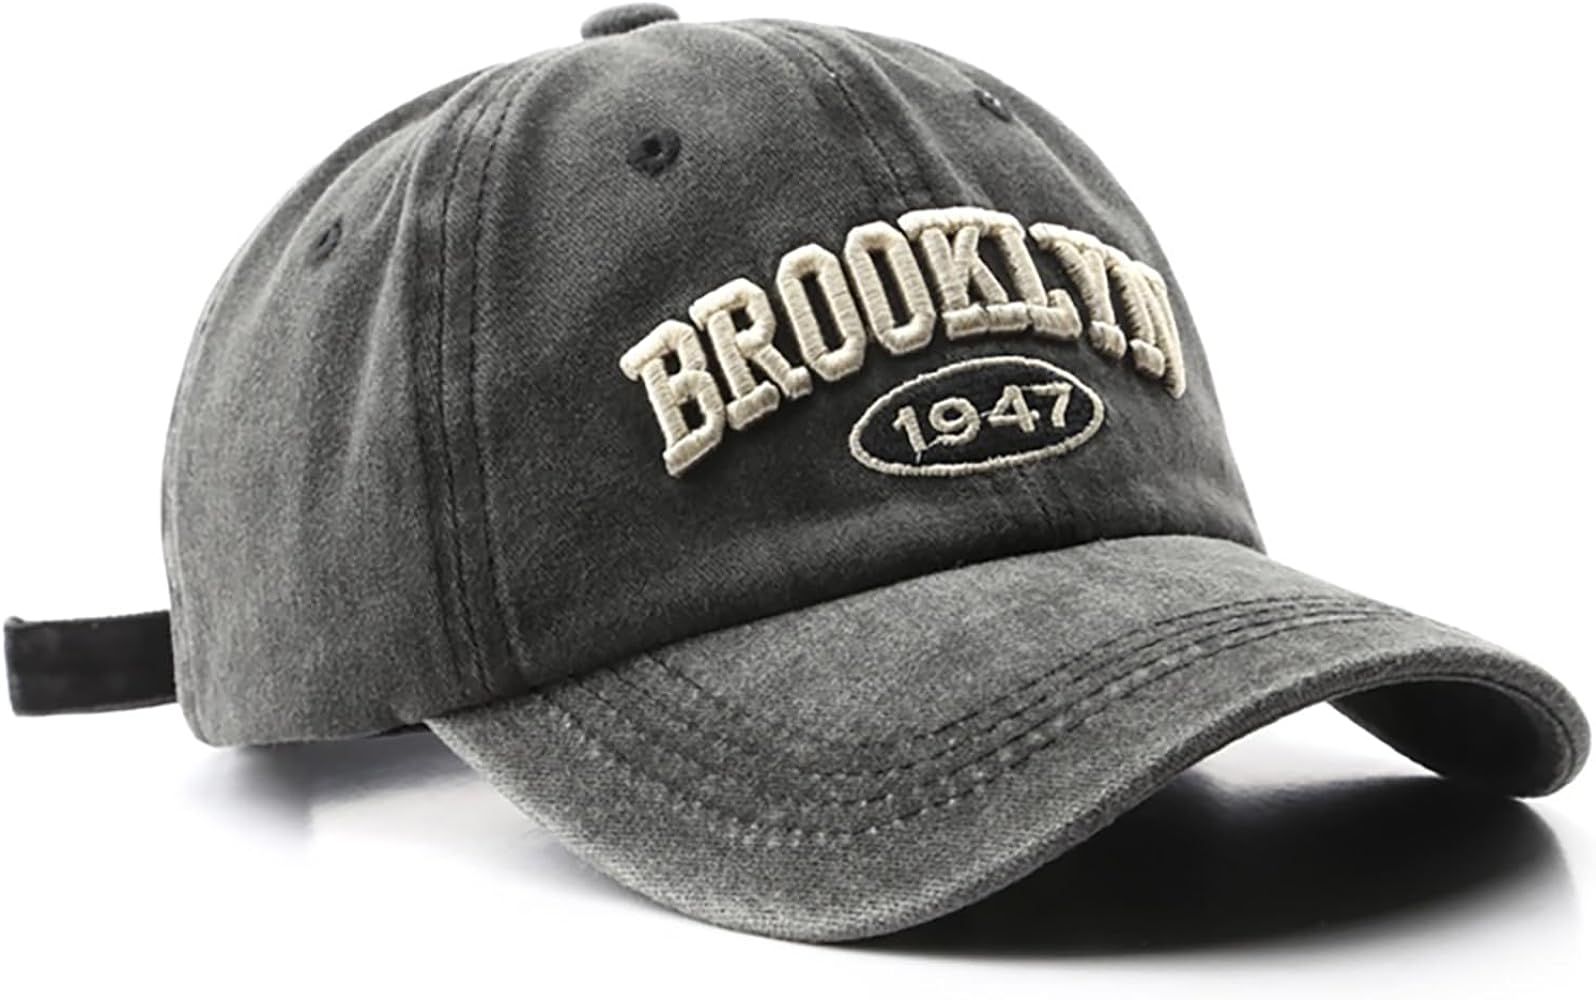 Brooklyn Cap Washed Vintage Baseball Cap Sun Hat for Men and Women | Amazon (US)